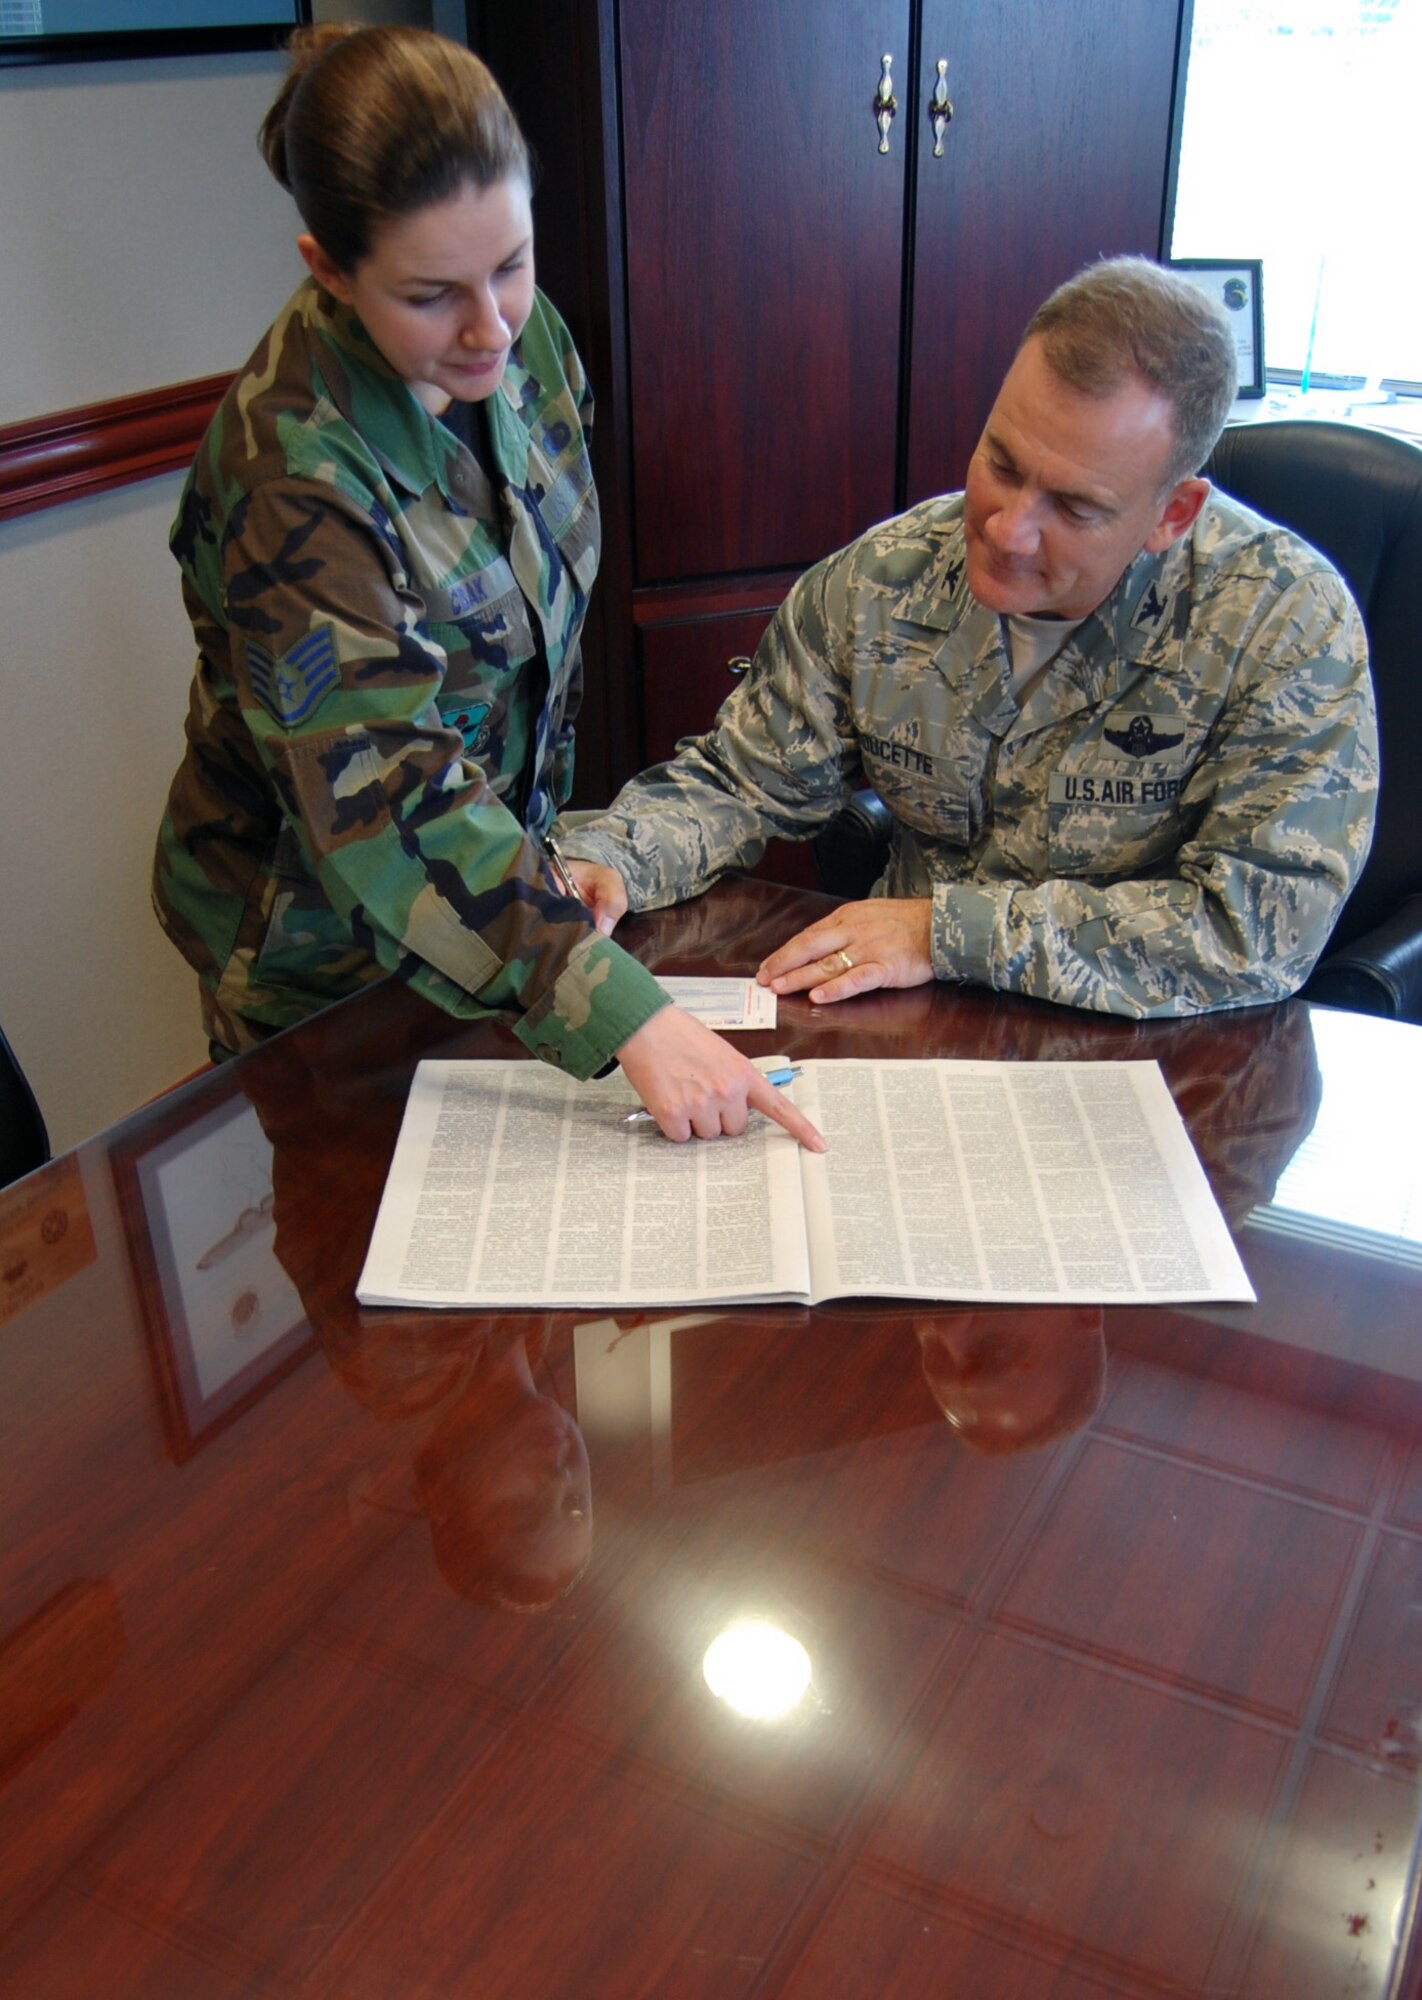 LAUGHLIN AIR FORCE BASE, Texas -- Col. John Doucette, 47th Flying Training Wing commander, signs a check for the Combined Federal Campaign here Sept. 9. (U.S. Air Force photo by Airman 1st Class Sara Csurilla)